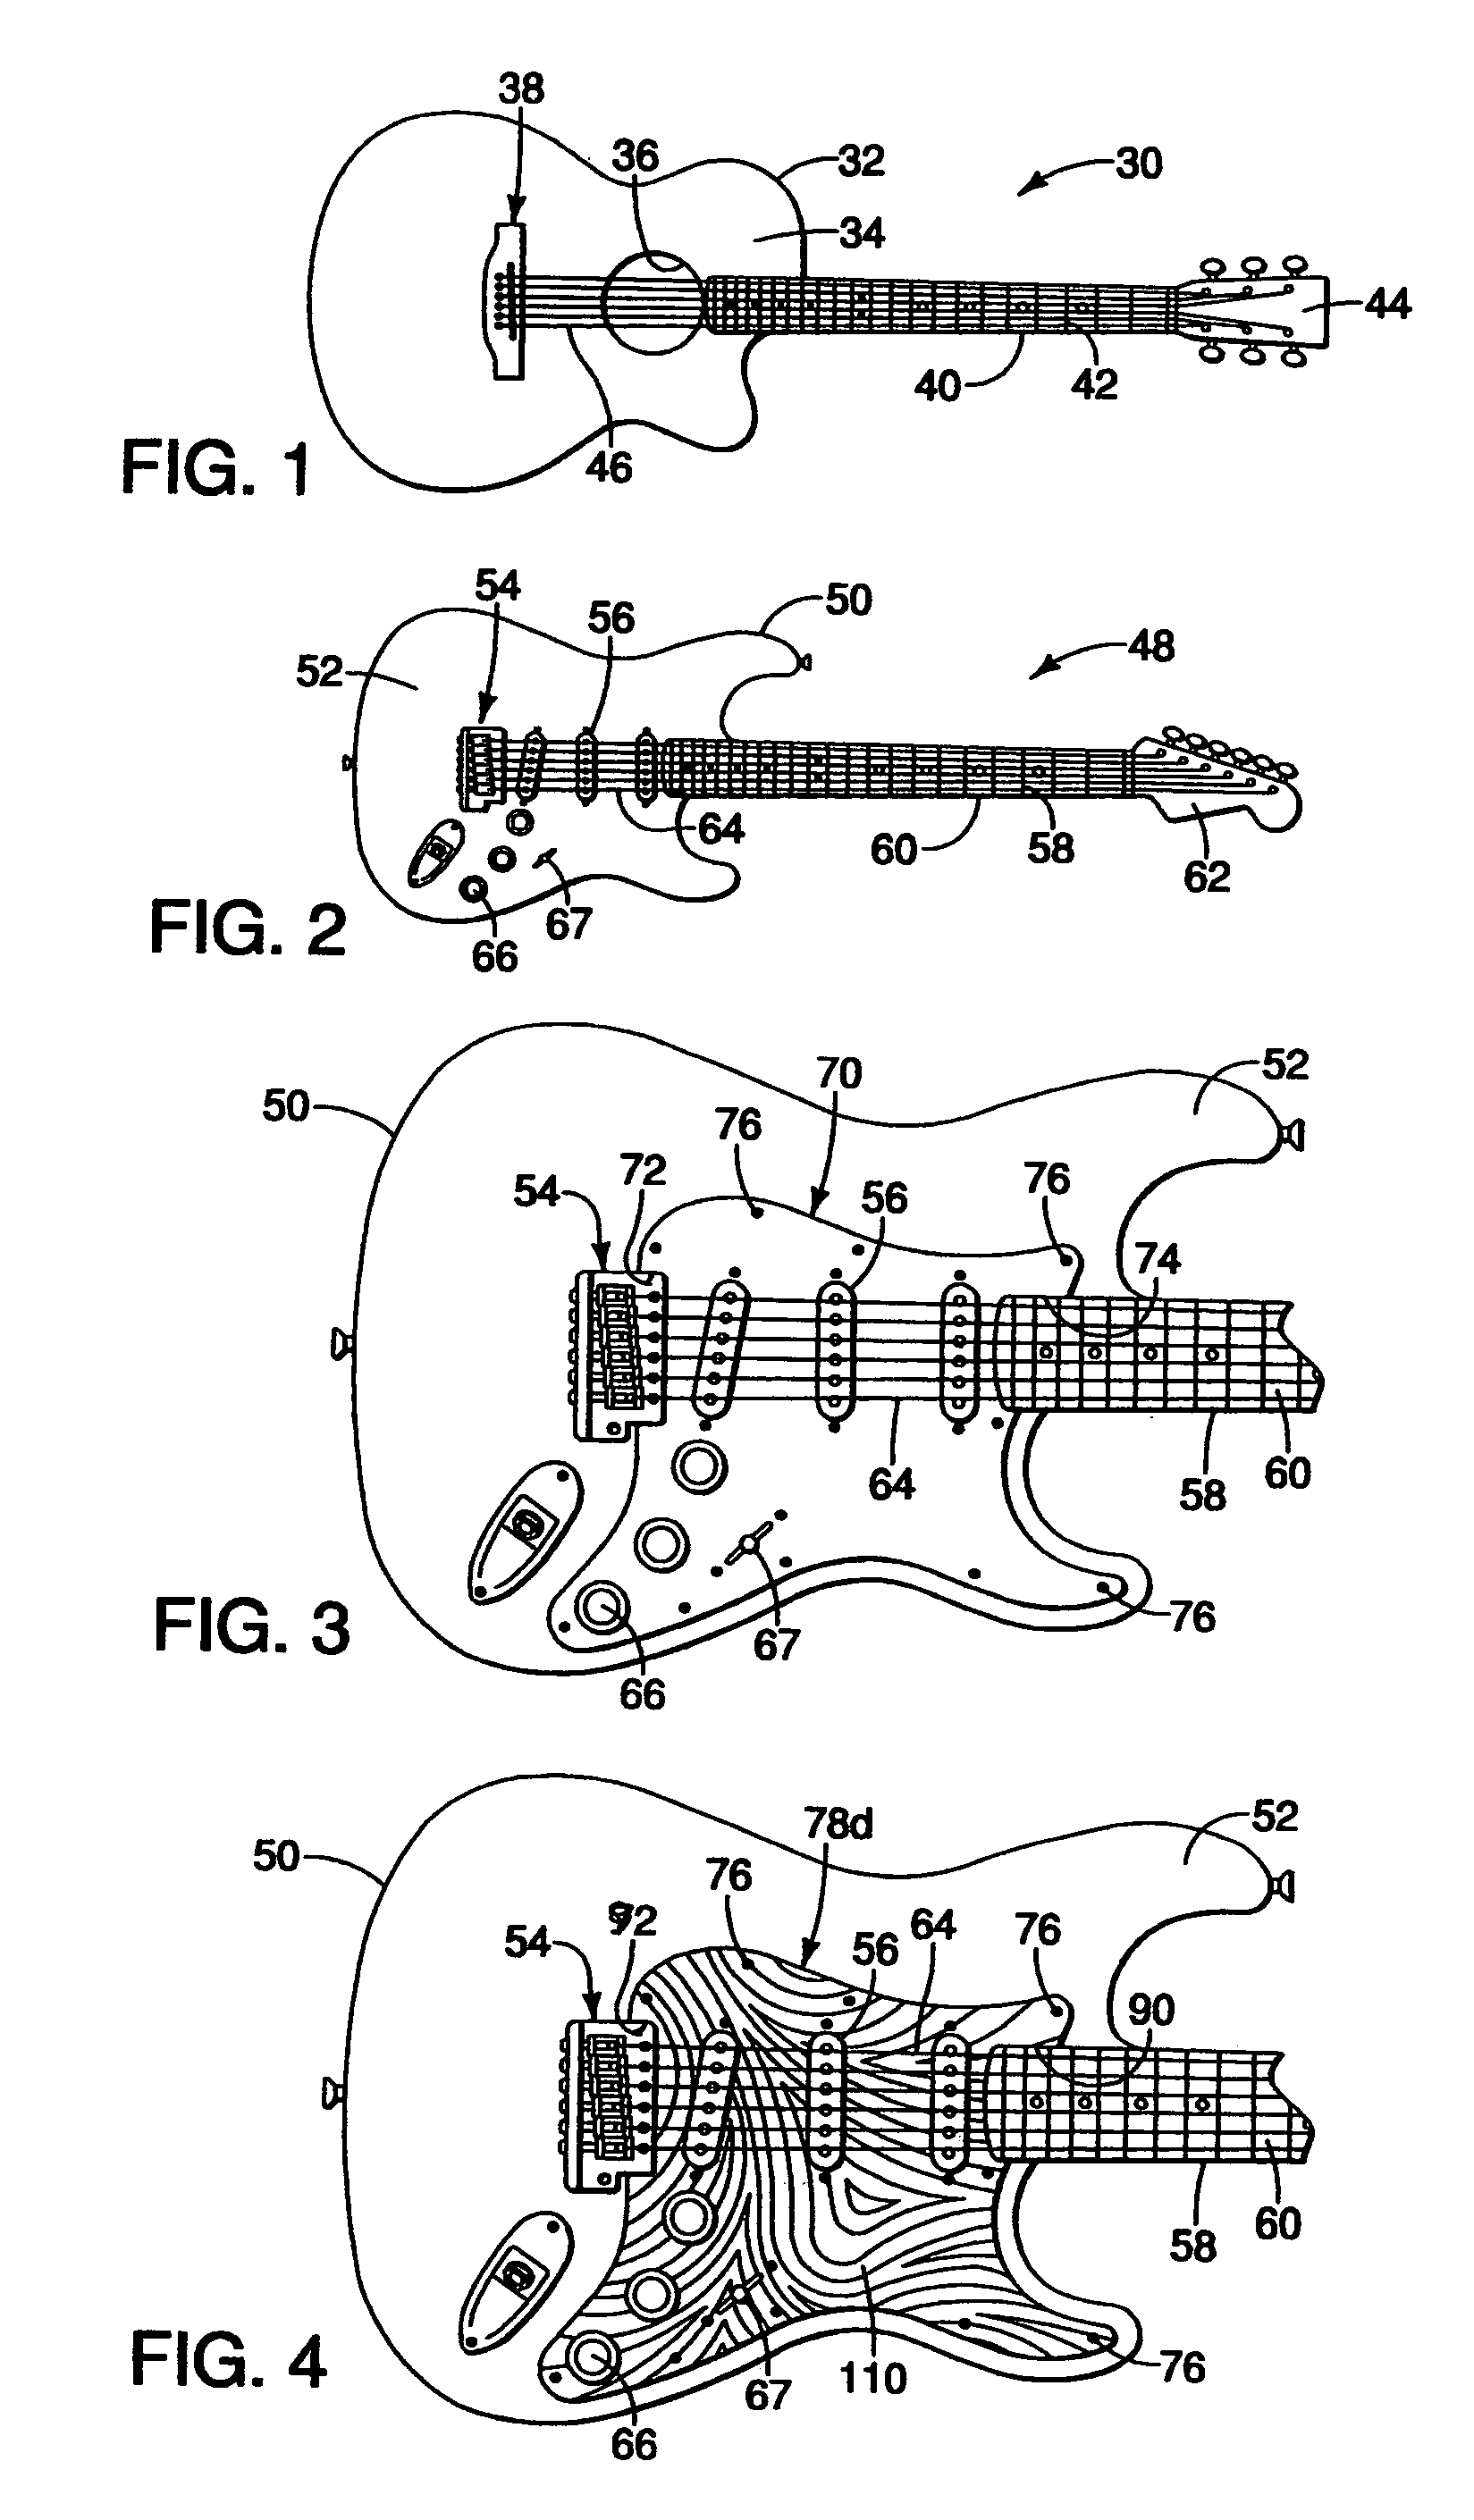 Cover for stringed instruments